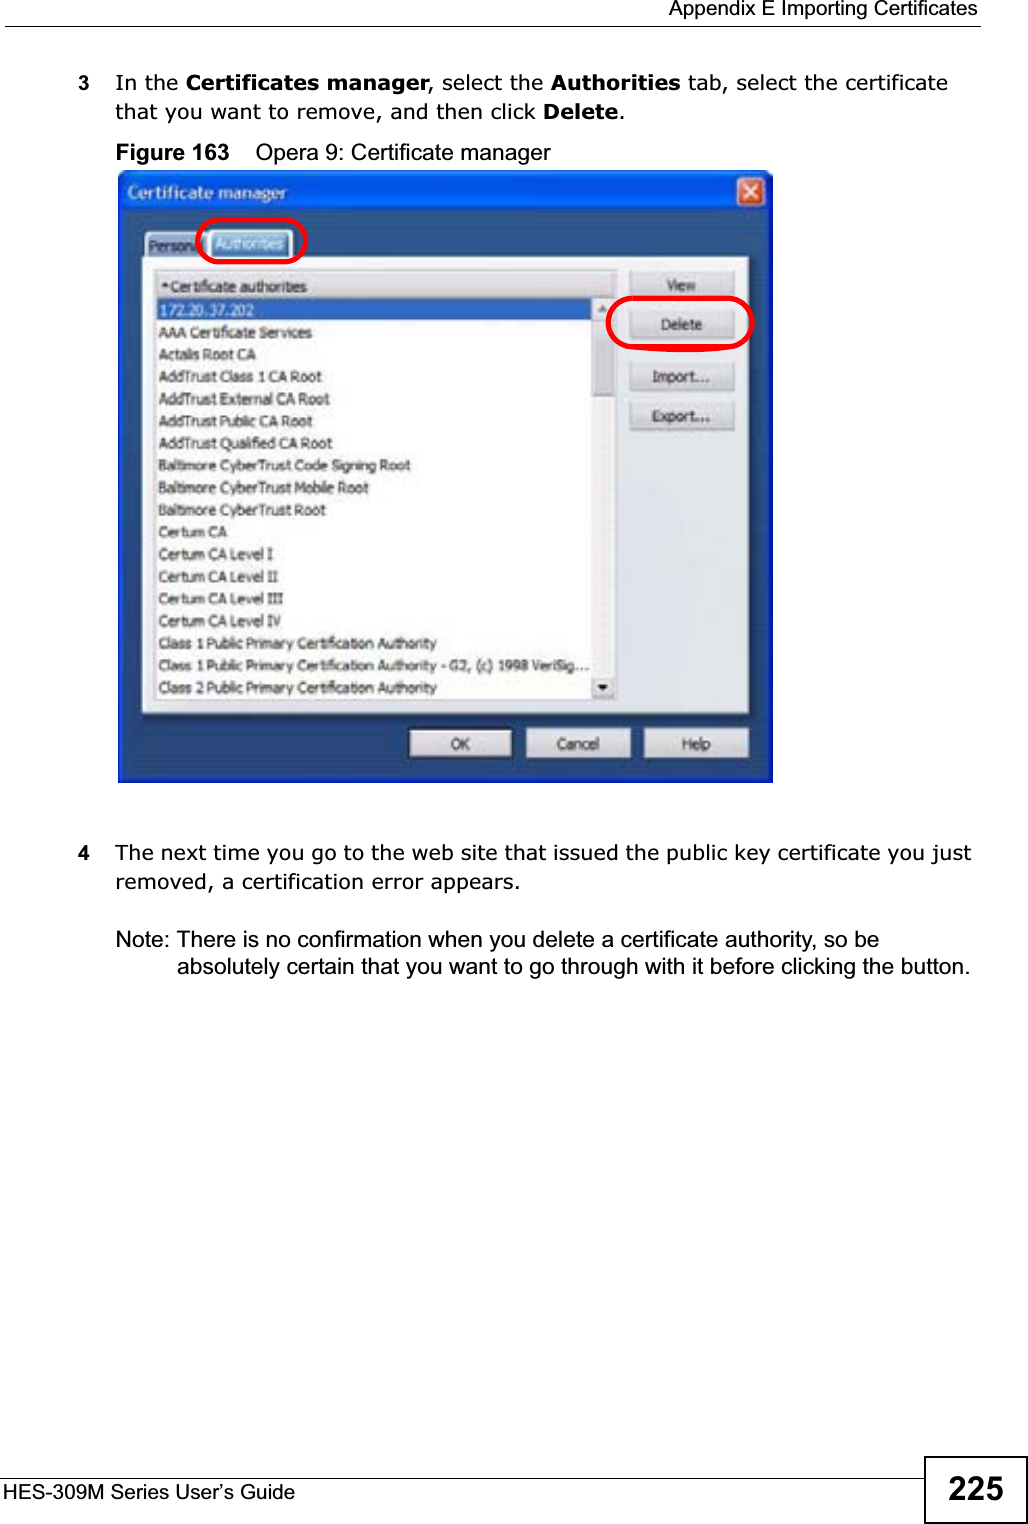  Appendix E Importing CertificatesHES-309M Series User’s Guide 2253In the Certificates manager, select the Authorities tab, select the certificate that you want to remove, and then click Delete.Figure 163    Opera 9: Certificate manager4The next time you go to the web site that issued the public key certificate you just removed, a certification error appears.Note: There is no confirmation when you delete a certificate authority, so be absolutely certain that you want to go through with it before clicking the button.